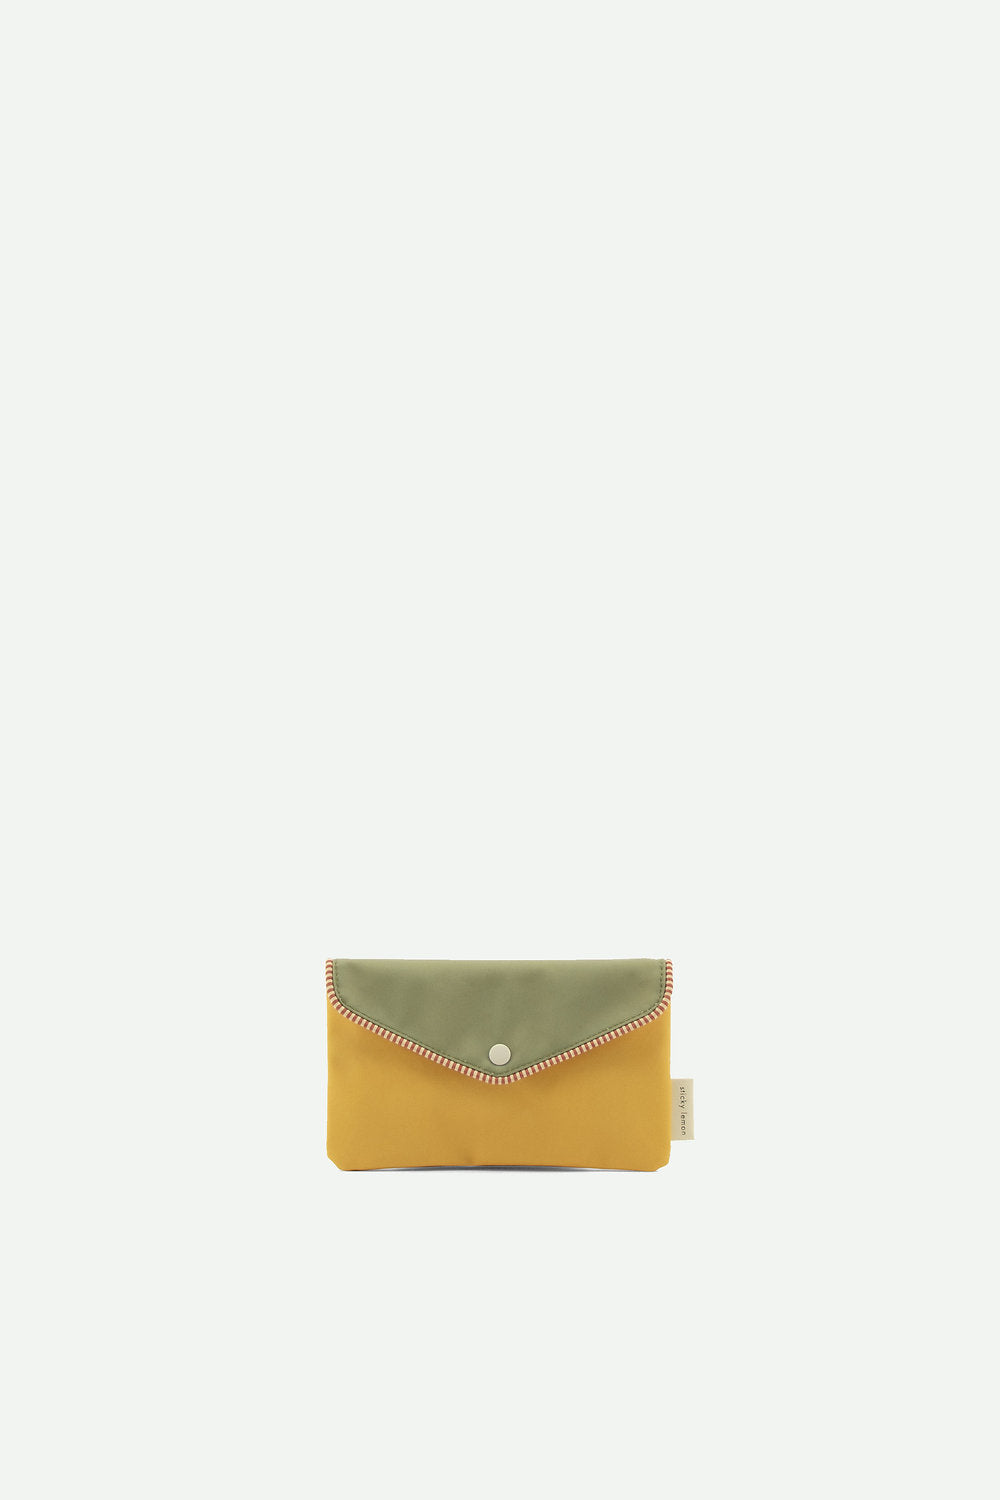 pencil case | scout master yellow